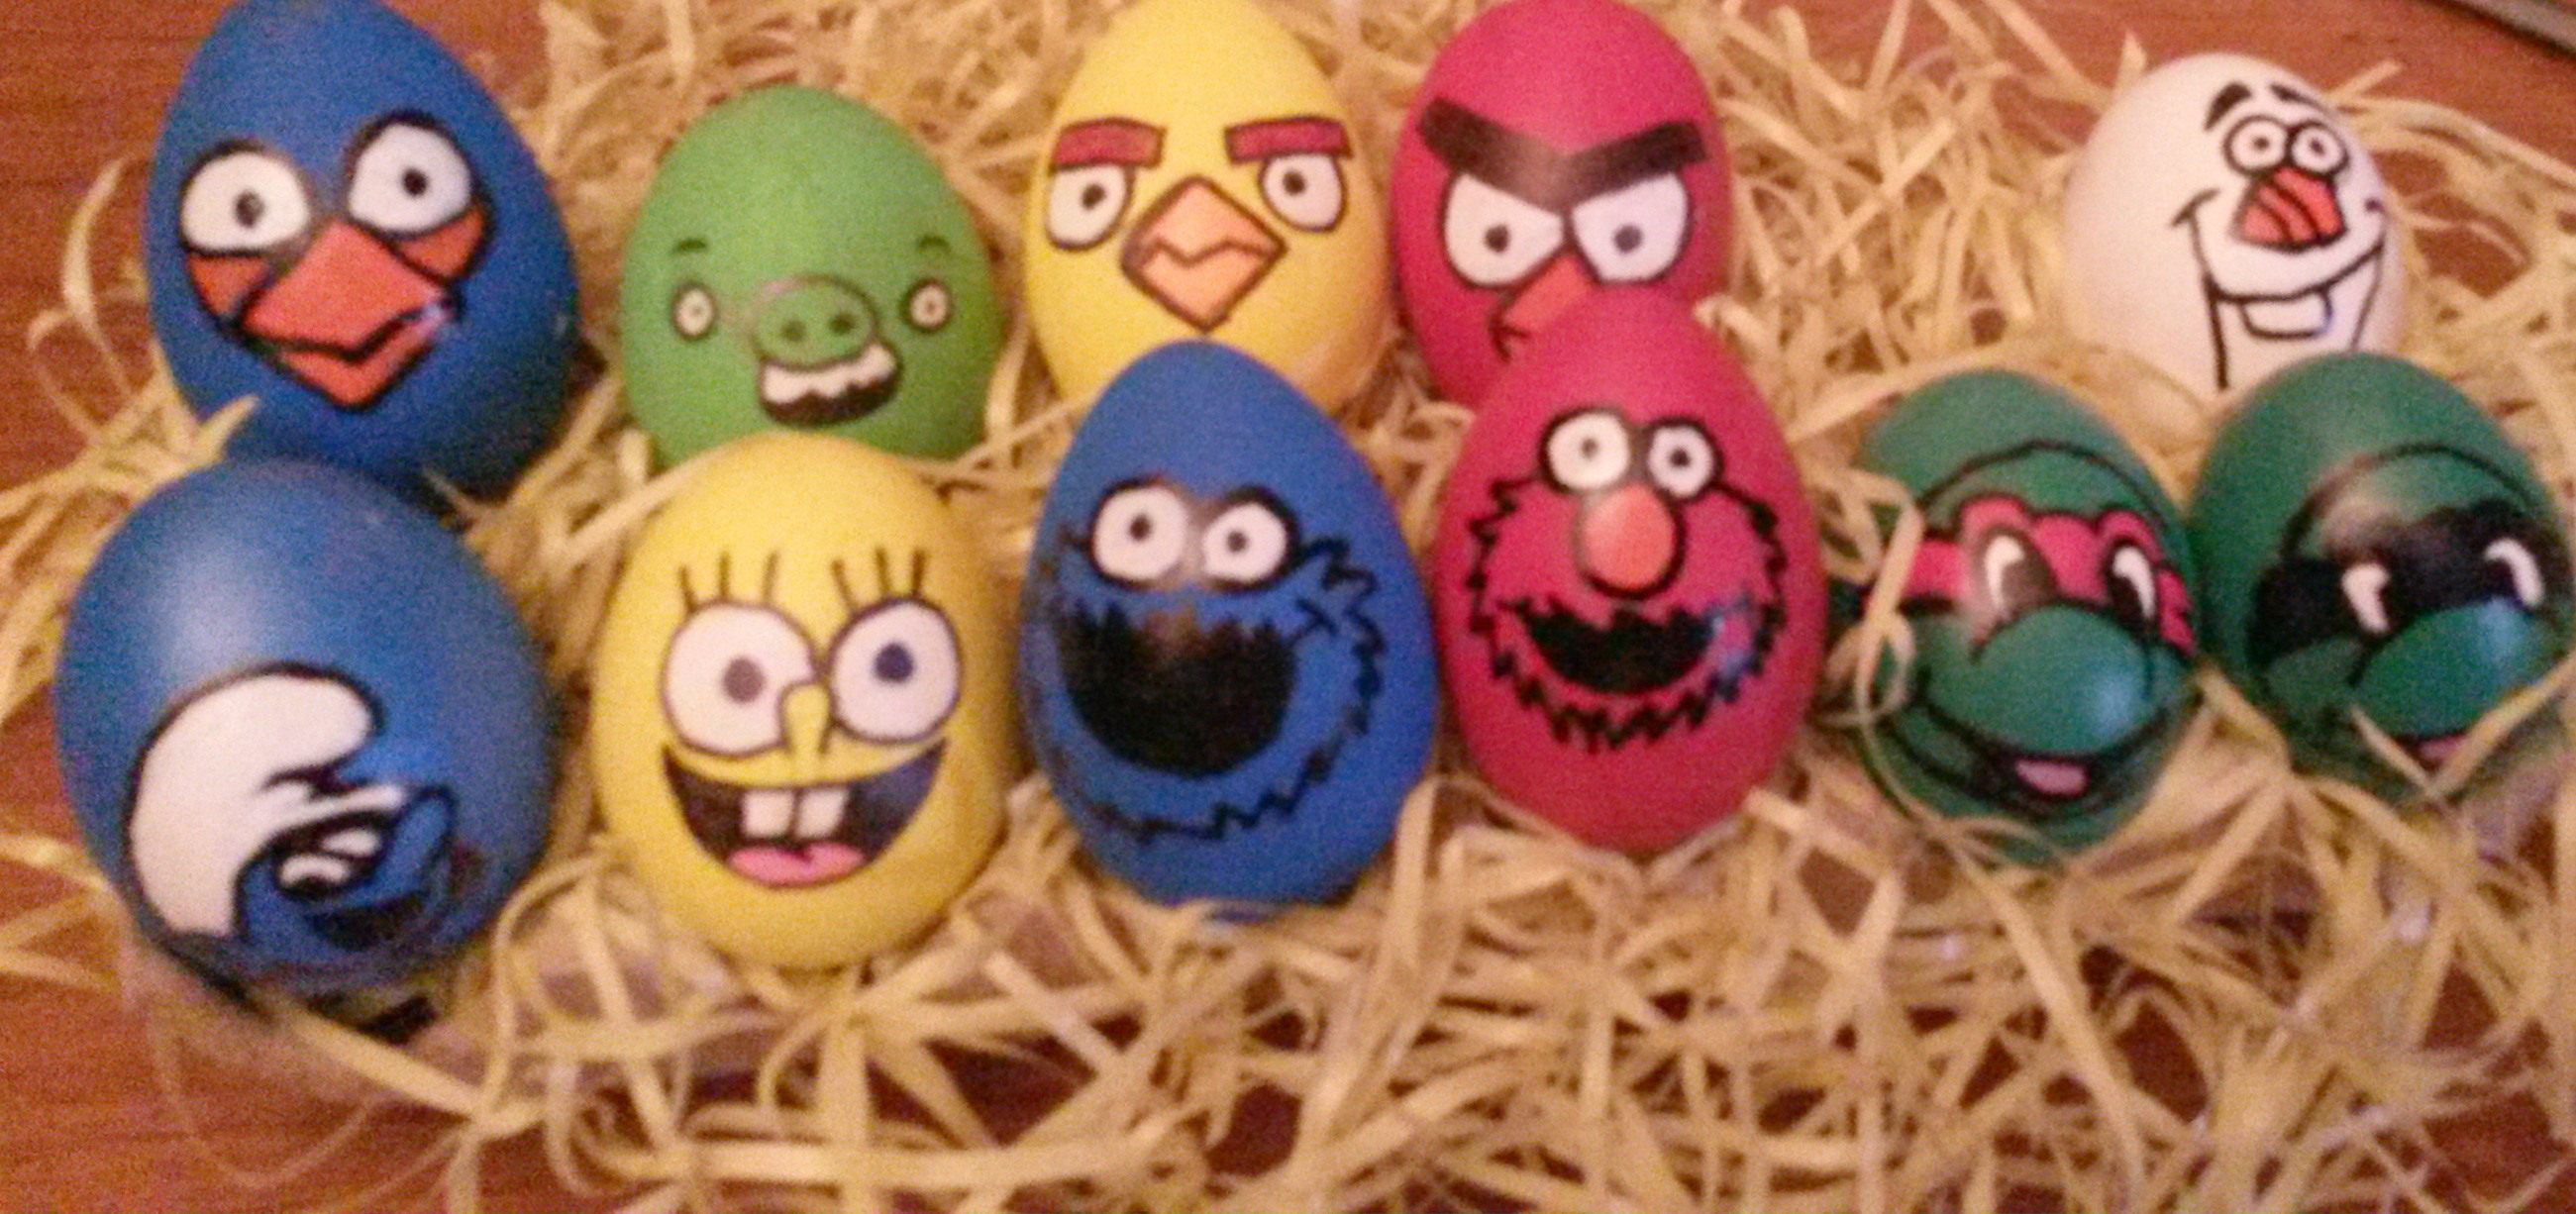 Character Easter Eggs | Fun Family Crafts